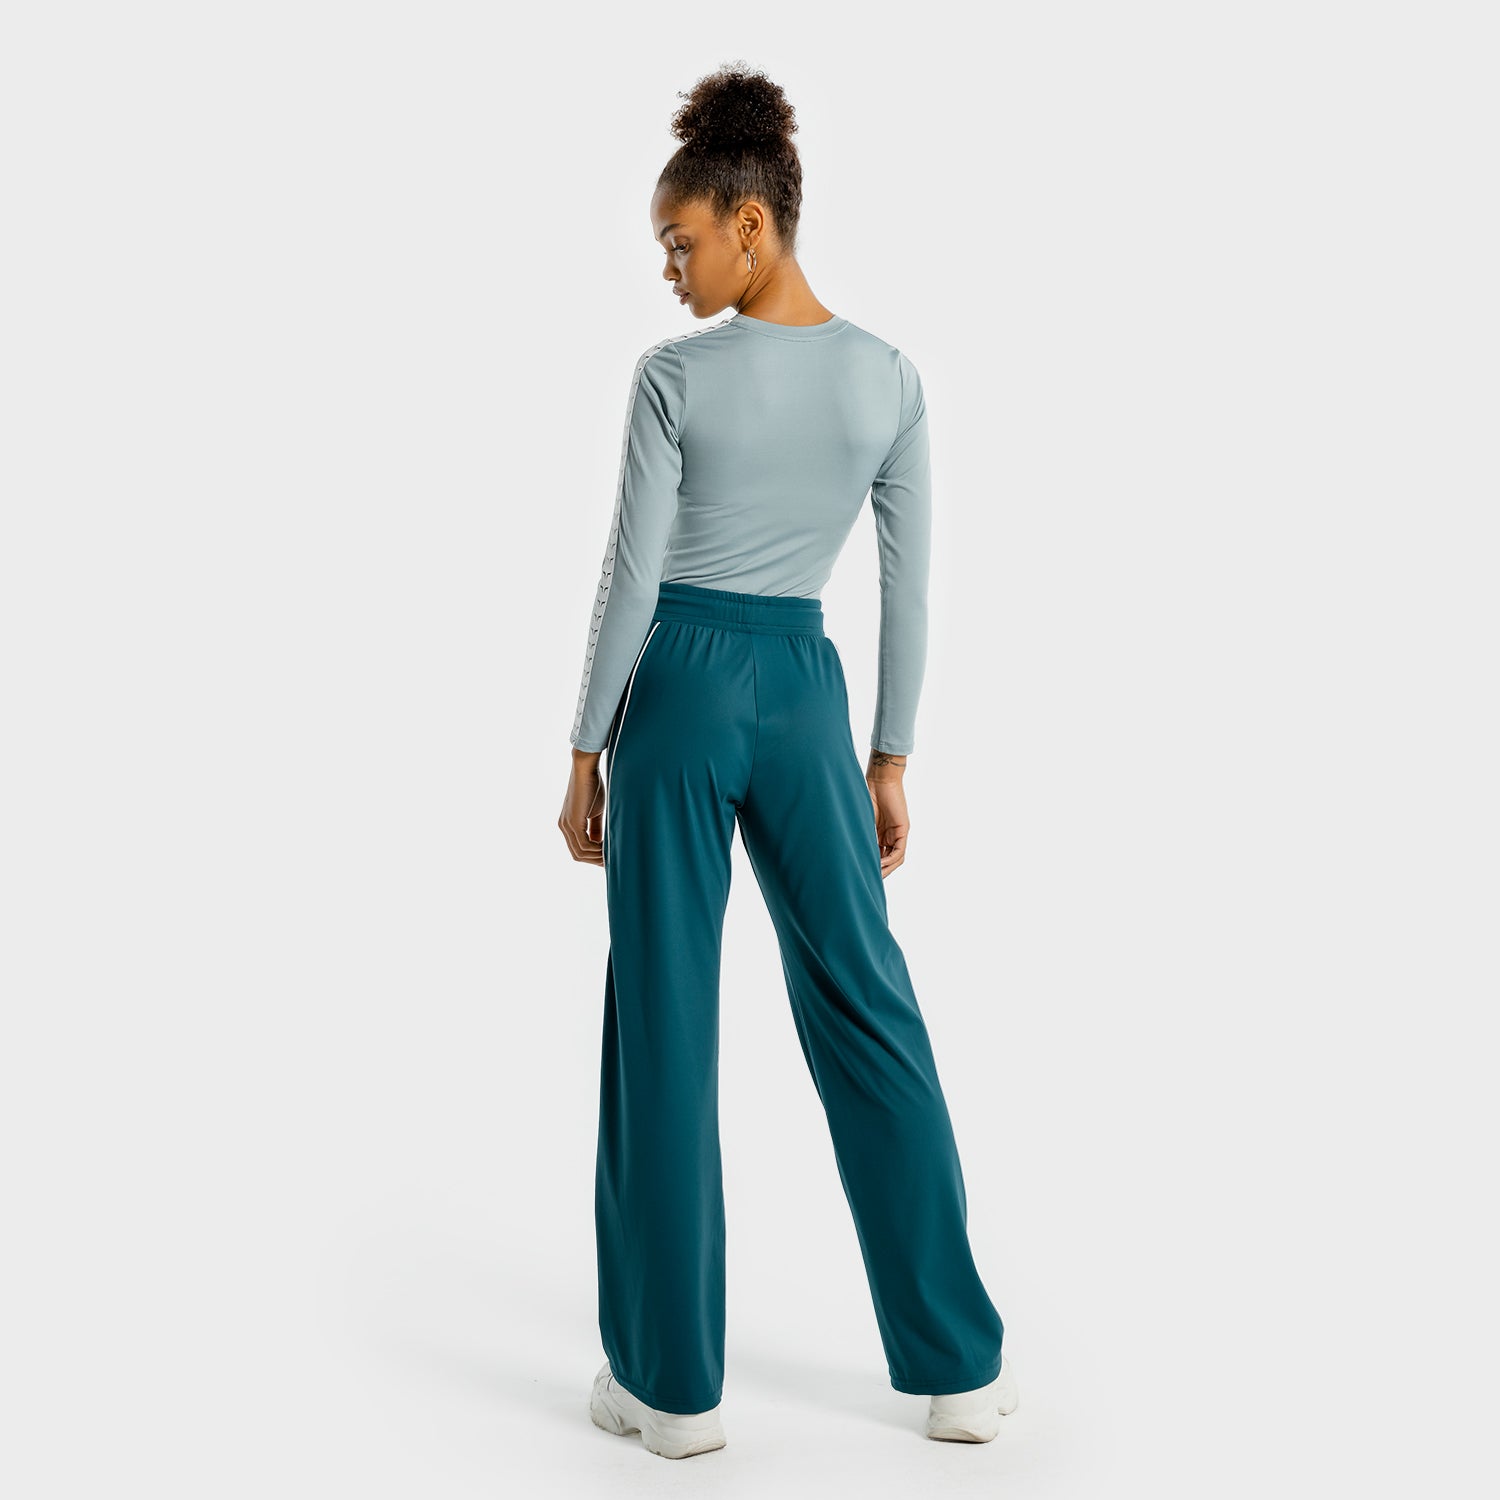 squatwolf-gym-pants-for-women-noor-wide-leg-pants-teal-workout-clothes